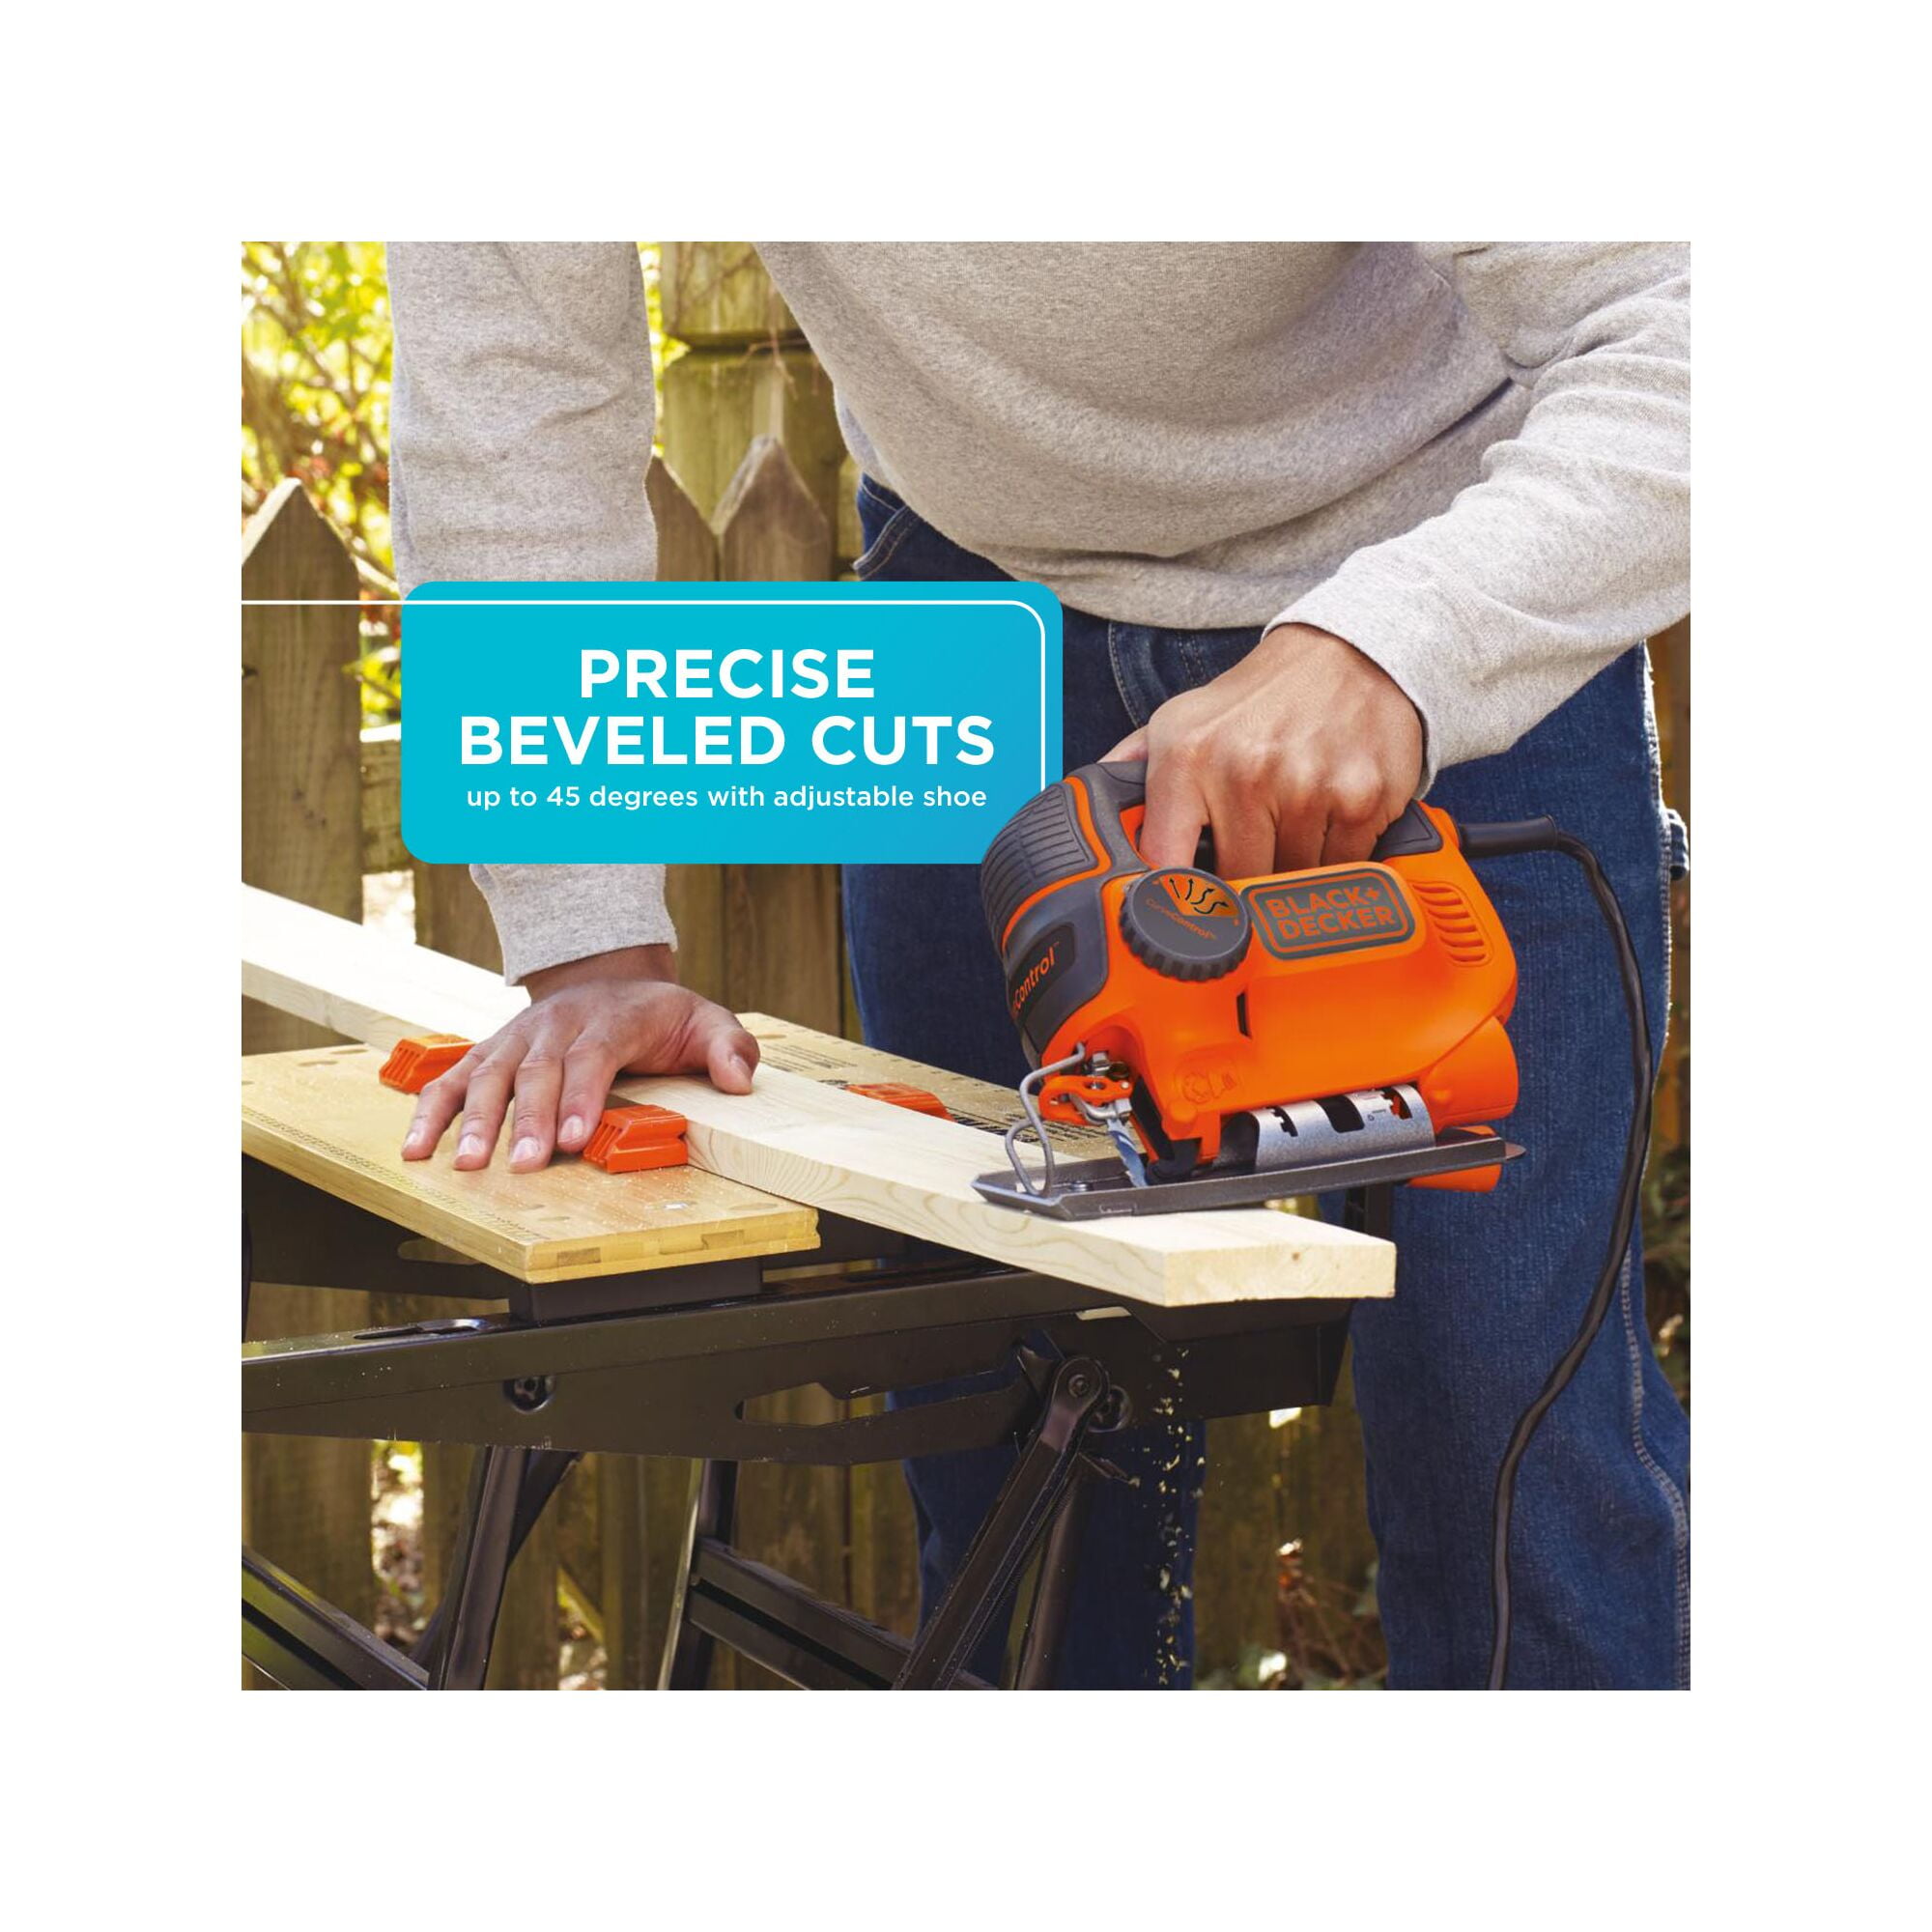 Black and Decker's New Jigsaw with Curve Control - Home Repair Tutor